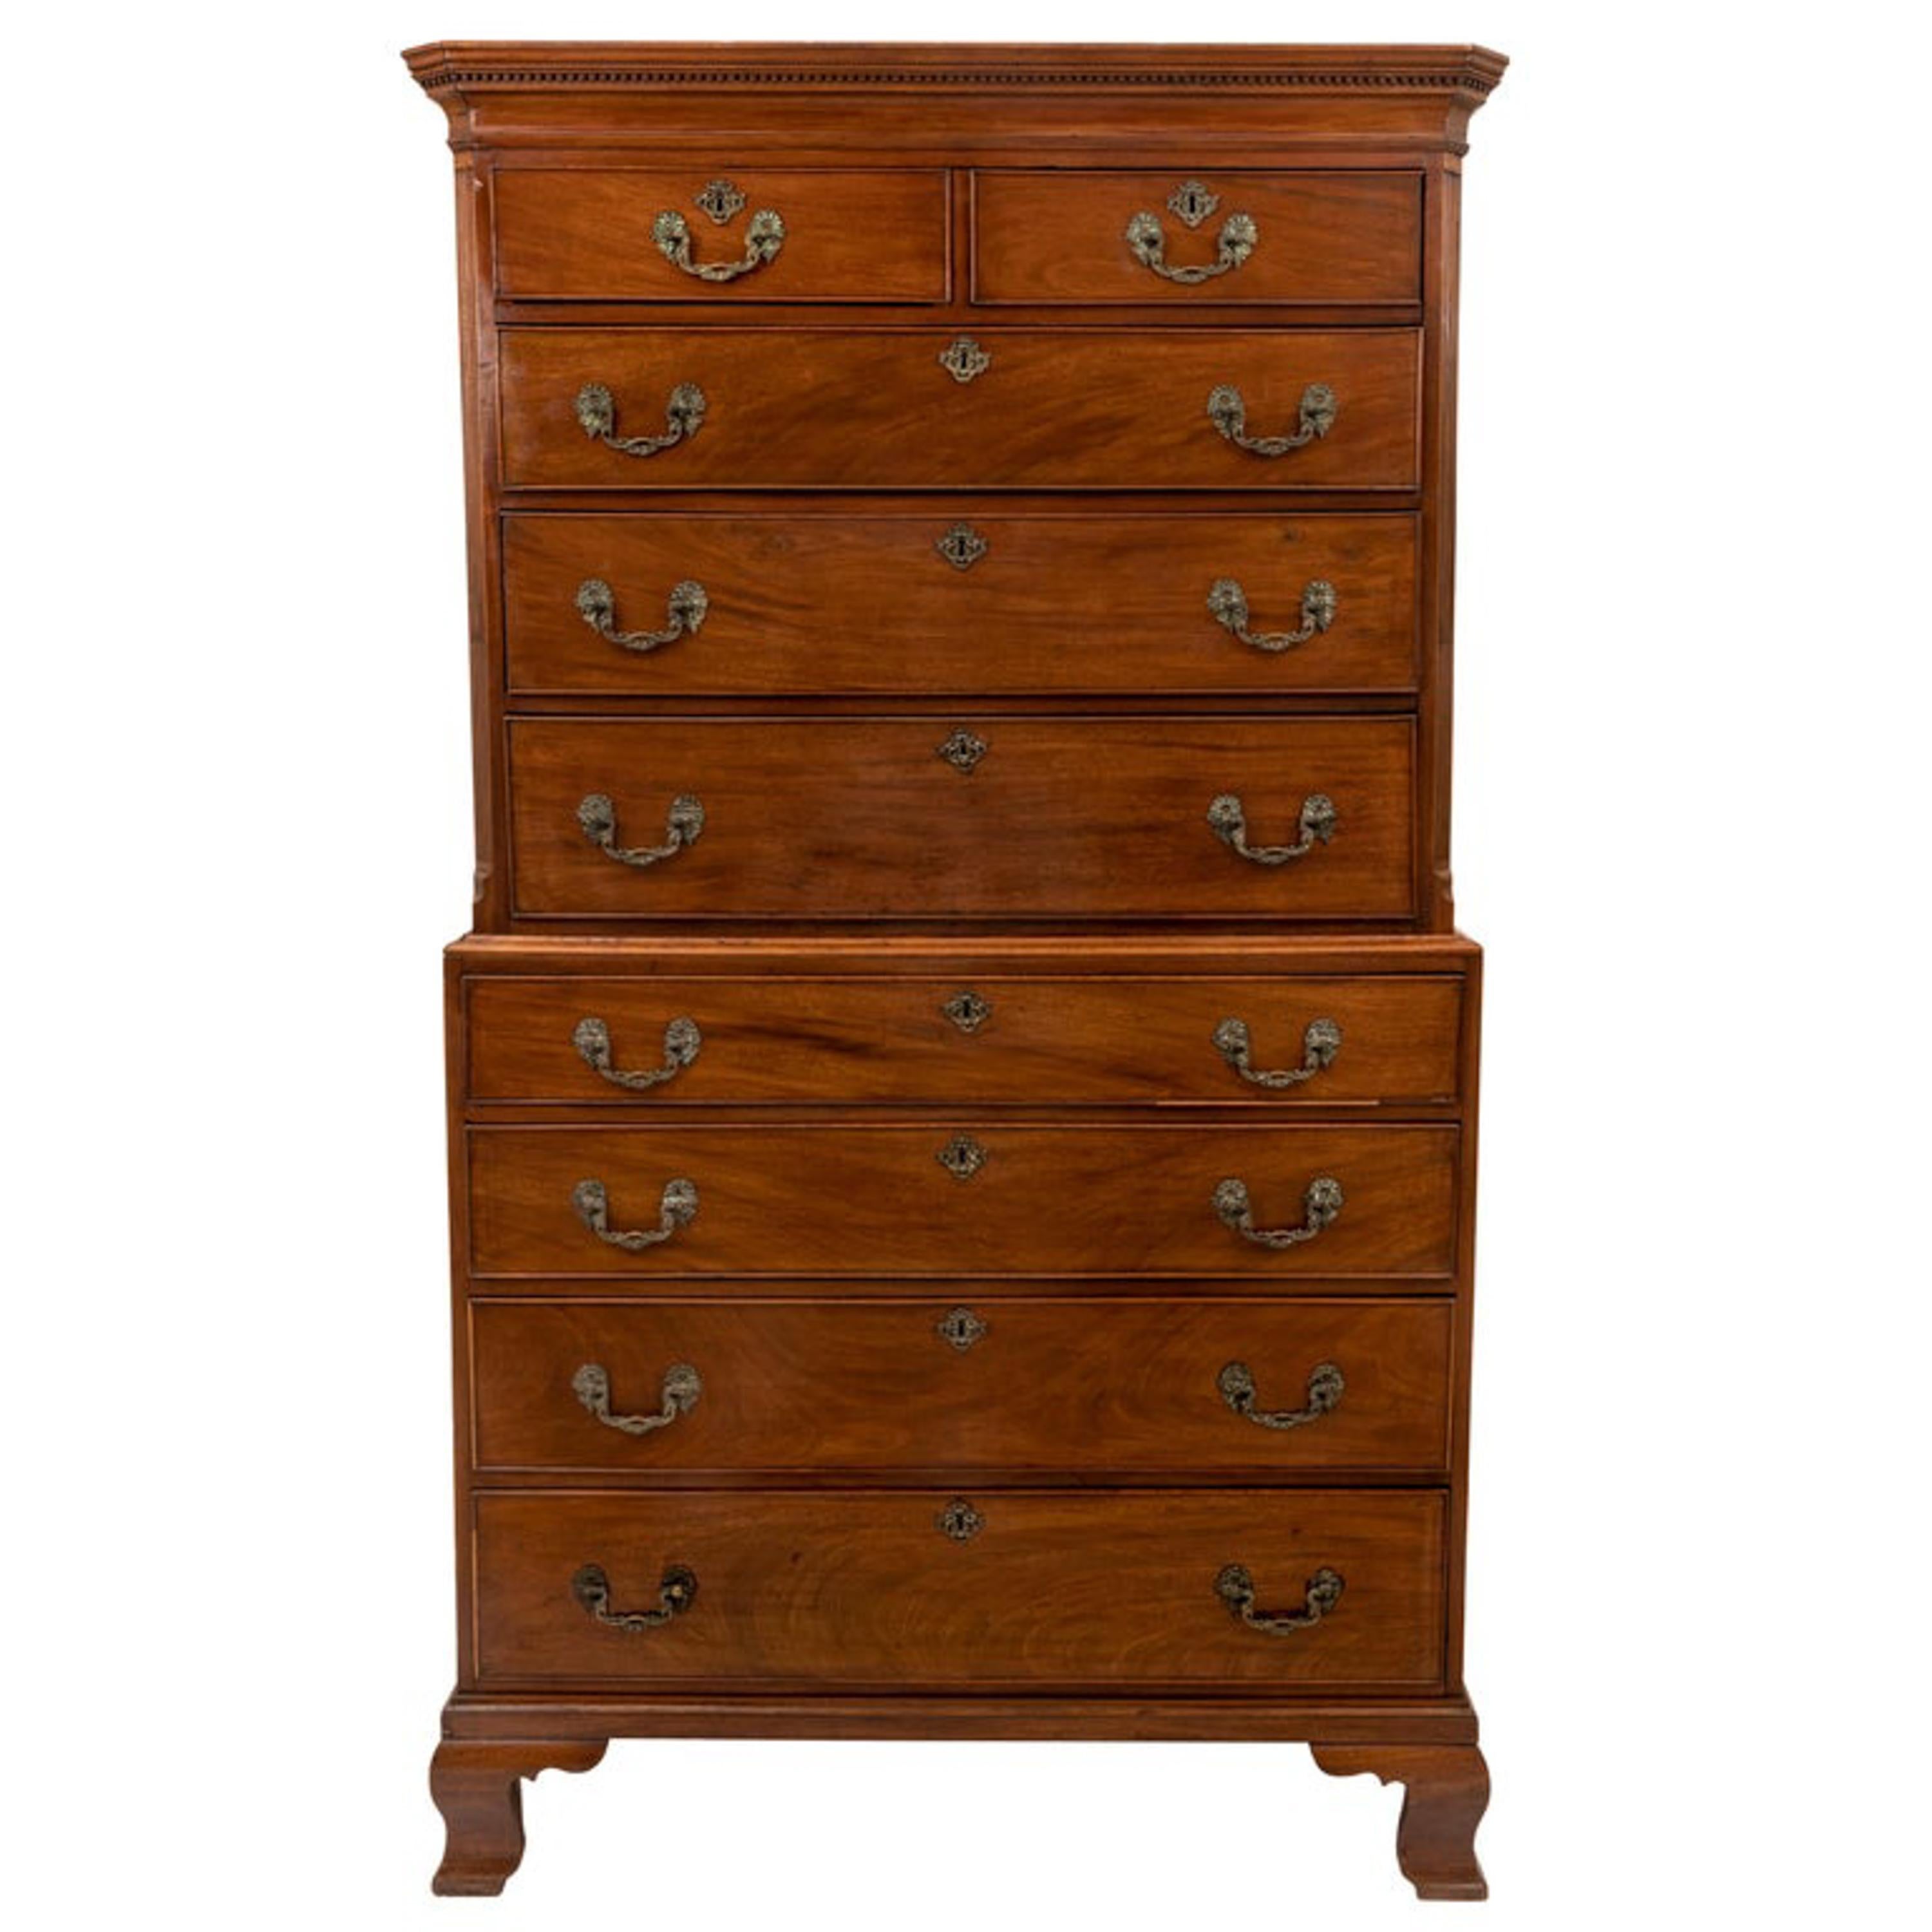 A fine quality George III flame mahogany chest on chest/tallboy, circa 1760.
This elegant Georgian mahogany chest on chest is of the finest quality and is made from solid Cuban flame mahogany. The chest in two sections; the top having a stepped